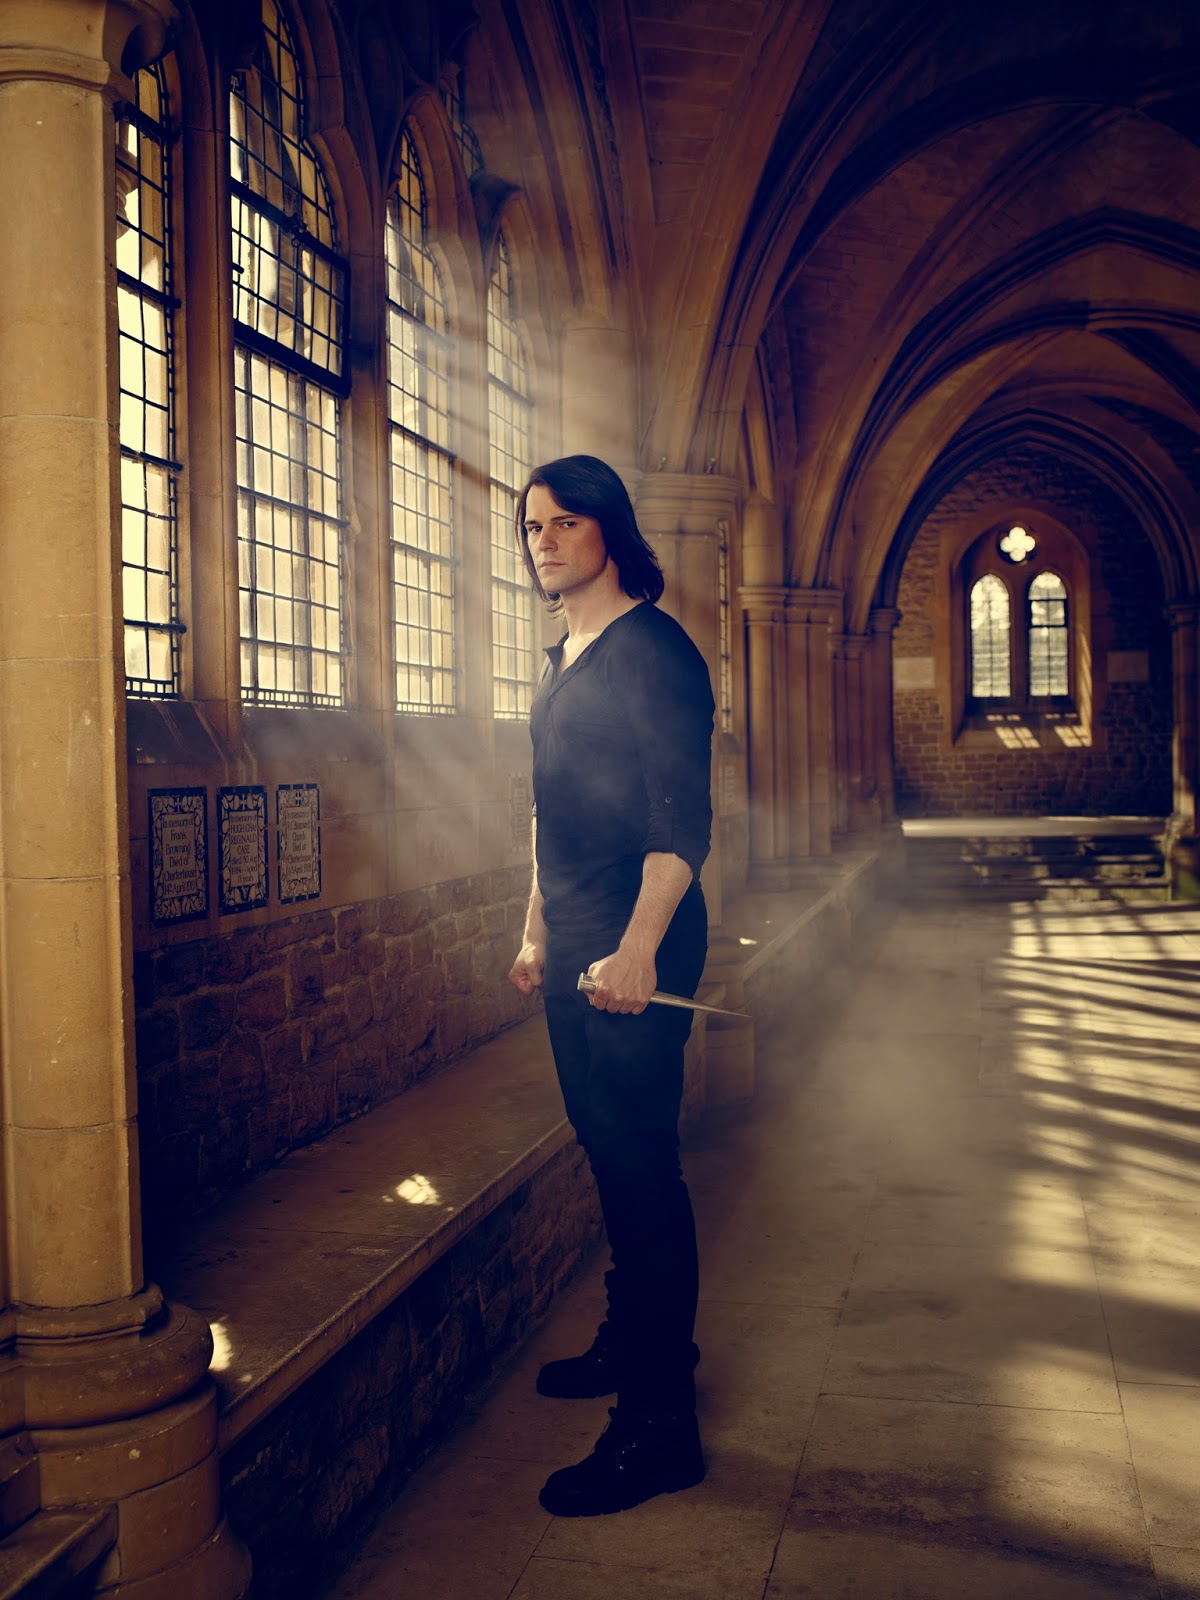 Vampire Academy Source: New Promotional photos from Vampire Academy